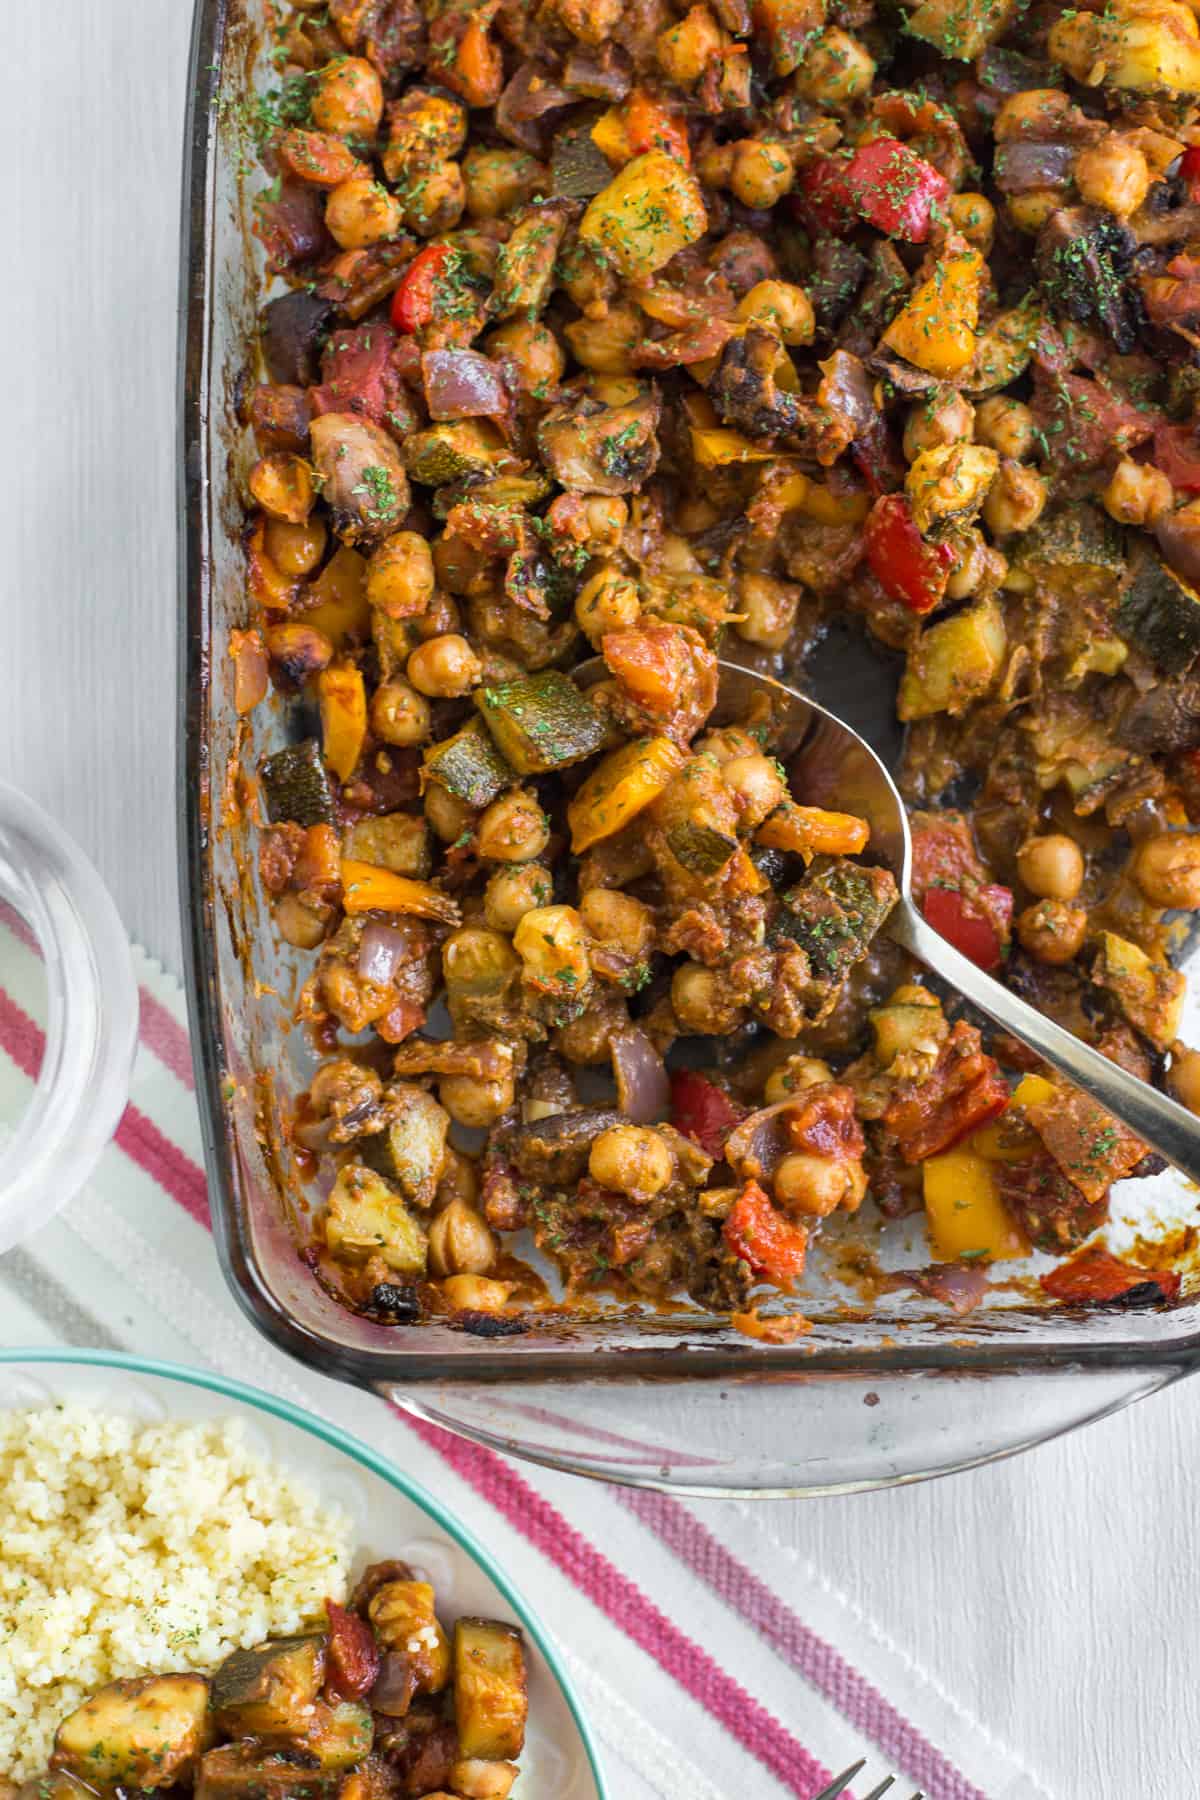 Roasted vegetable ratatouille in a baking dish with a spoon